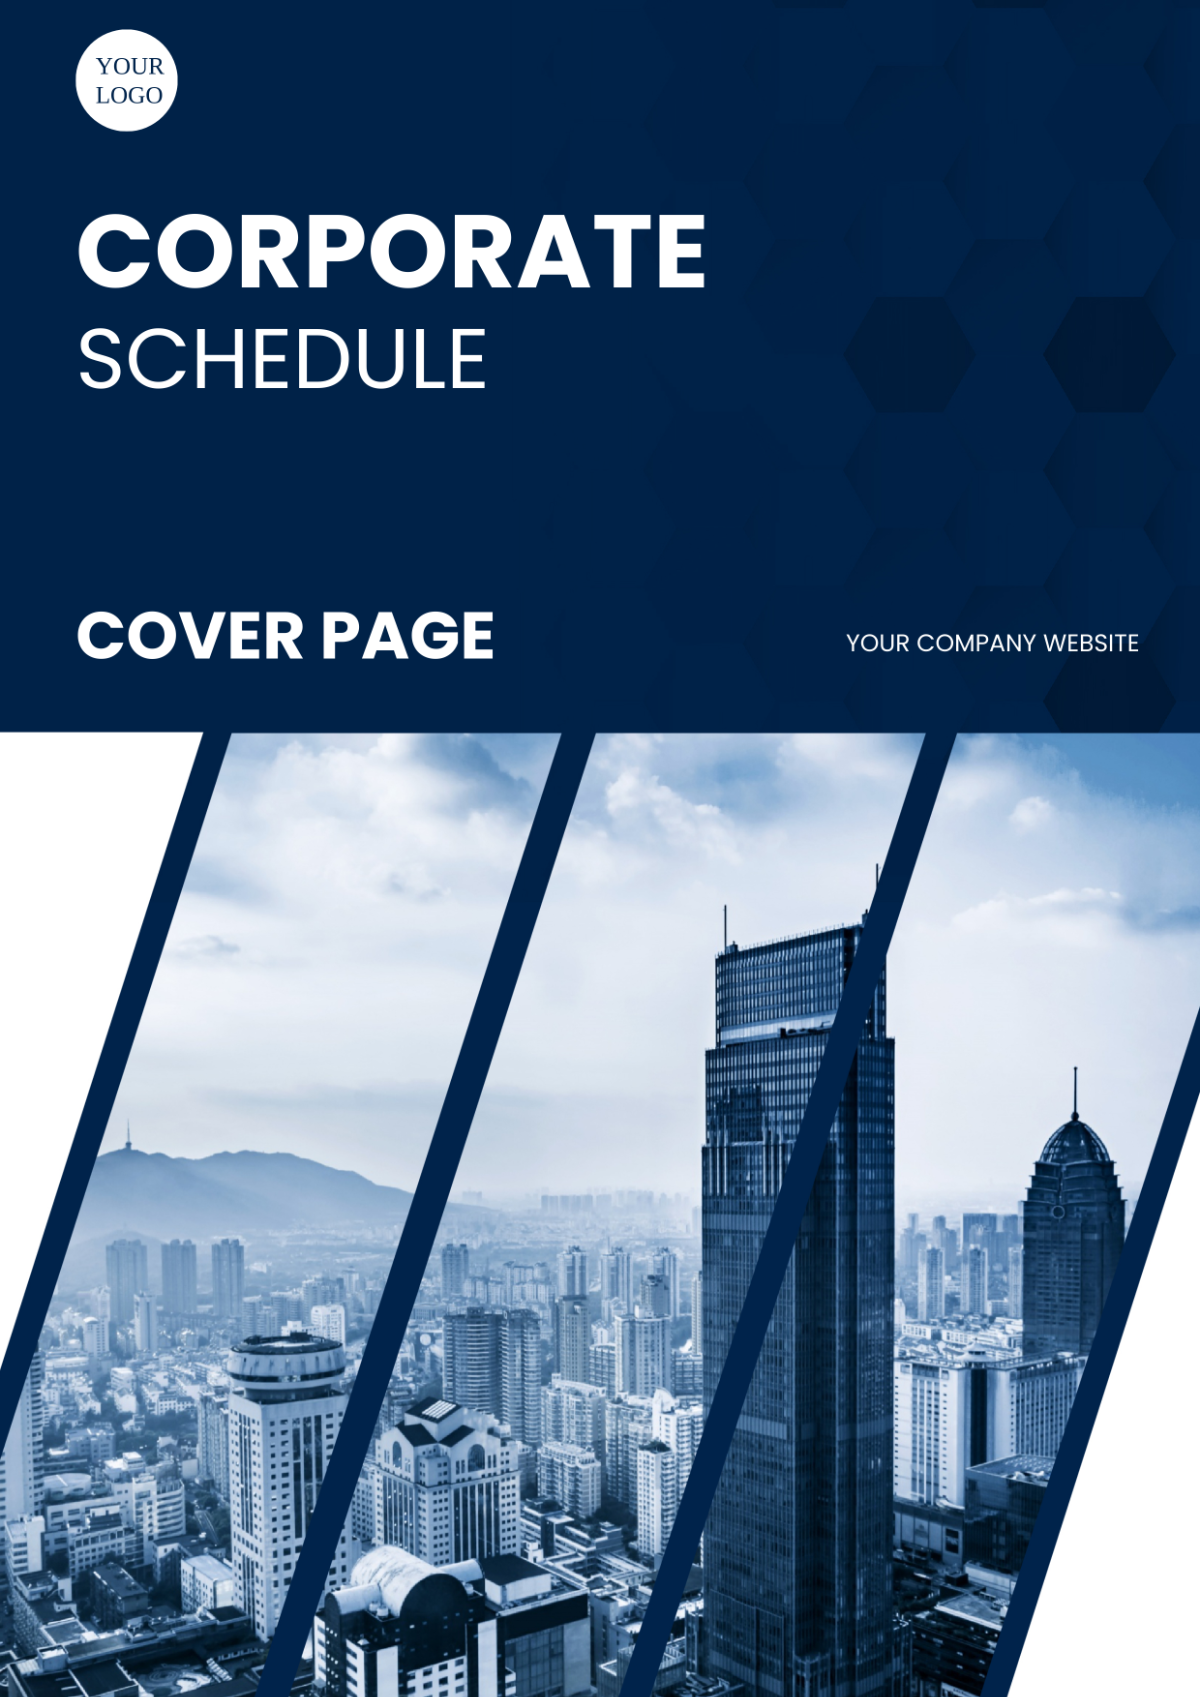 Corporate Schedule Cover Page